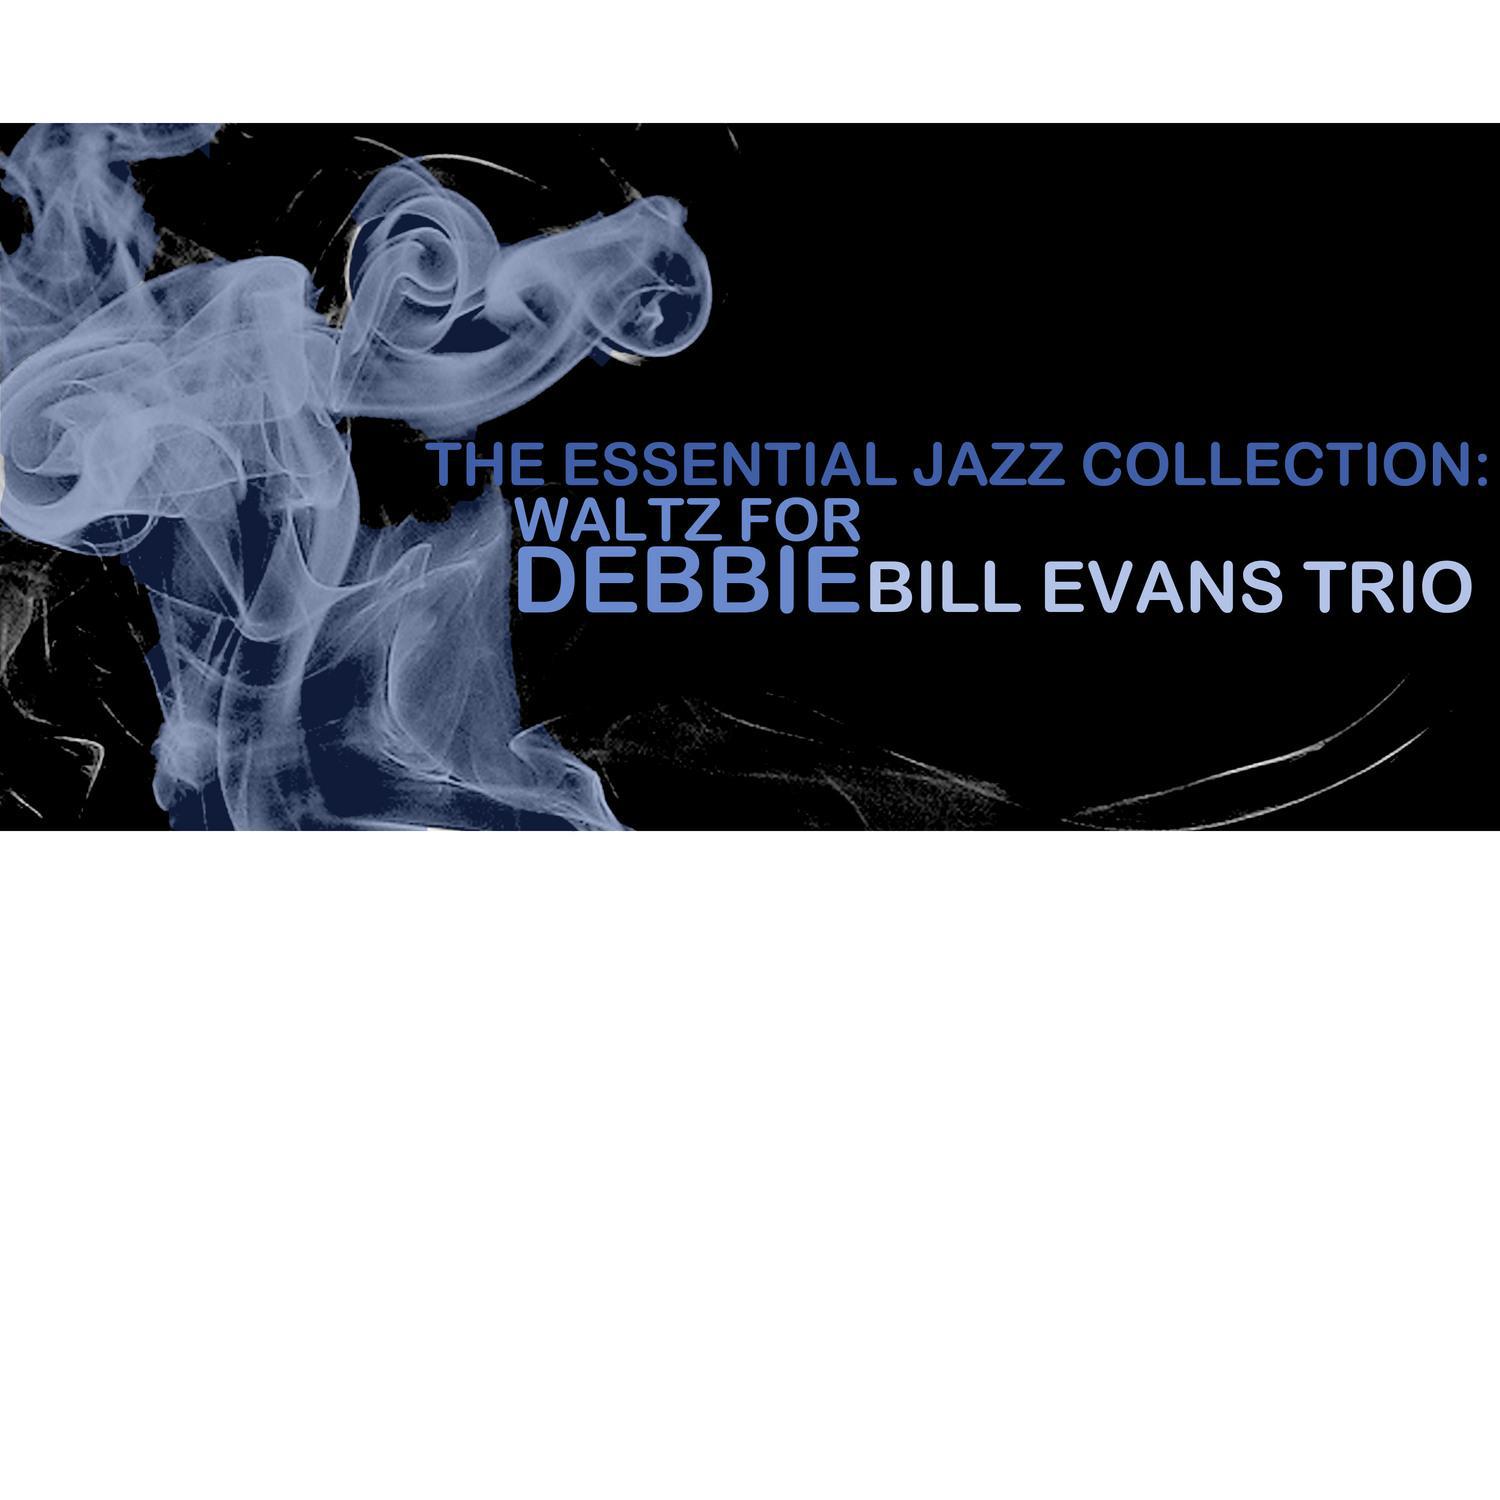 The Essential Jazz Collection: Waltz for Debby